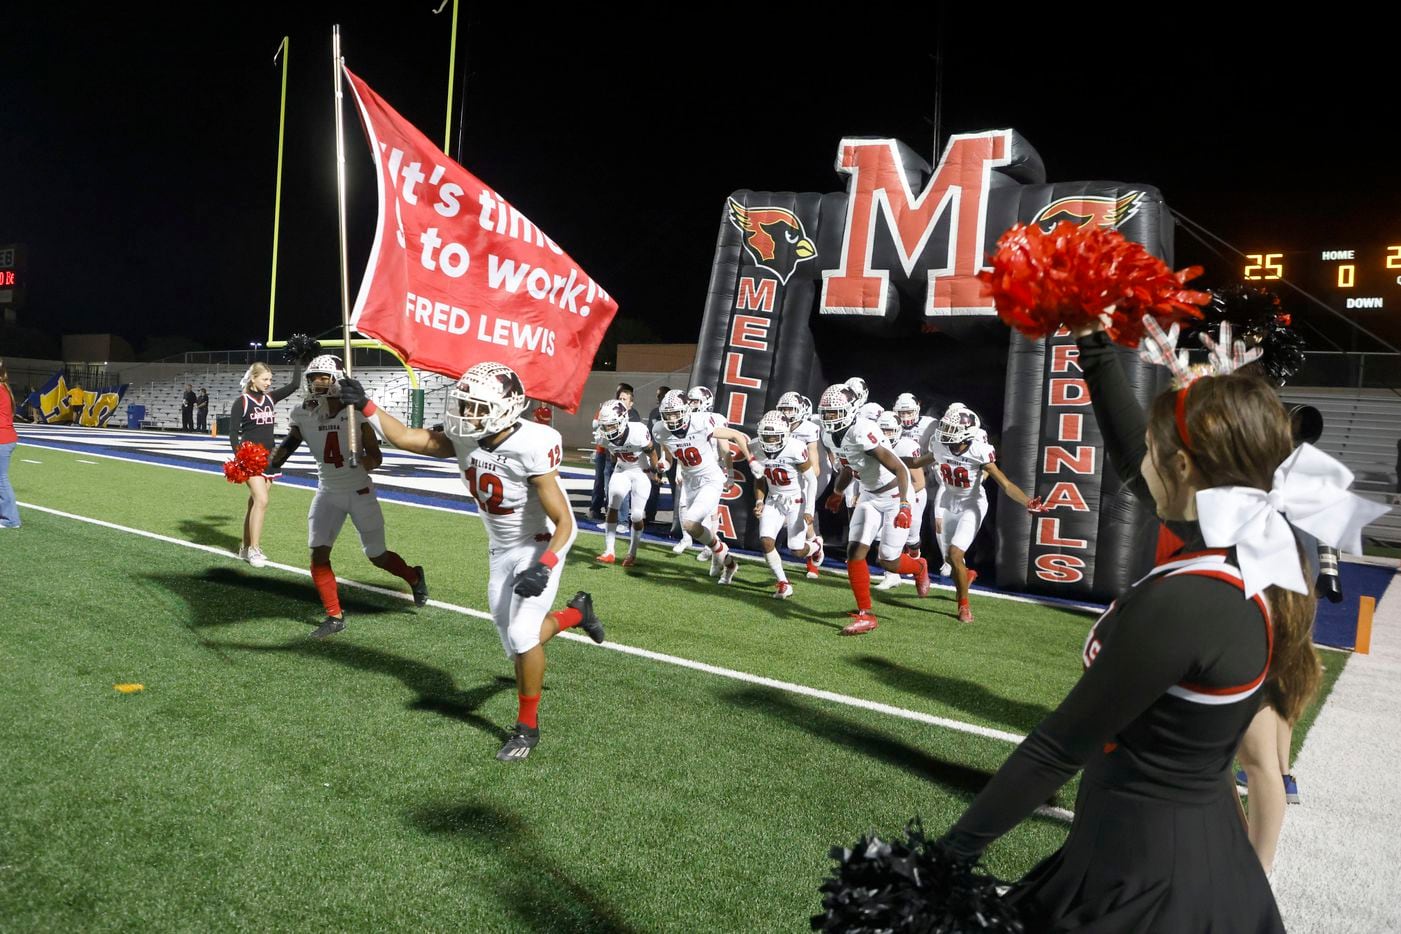 Melissa’s Ashton Mitchell-Johnson (12) leads the team onto the field as they played Stephenville during a Class 4A Division I Region II final high school football game in Bedford, Texas on Friday, Dec. 3, 2021. (Michael Ainsworth/Special Contributor)